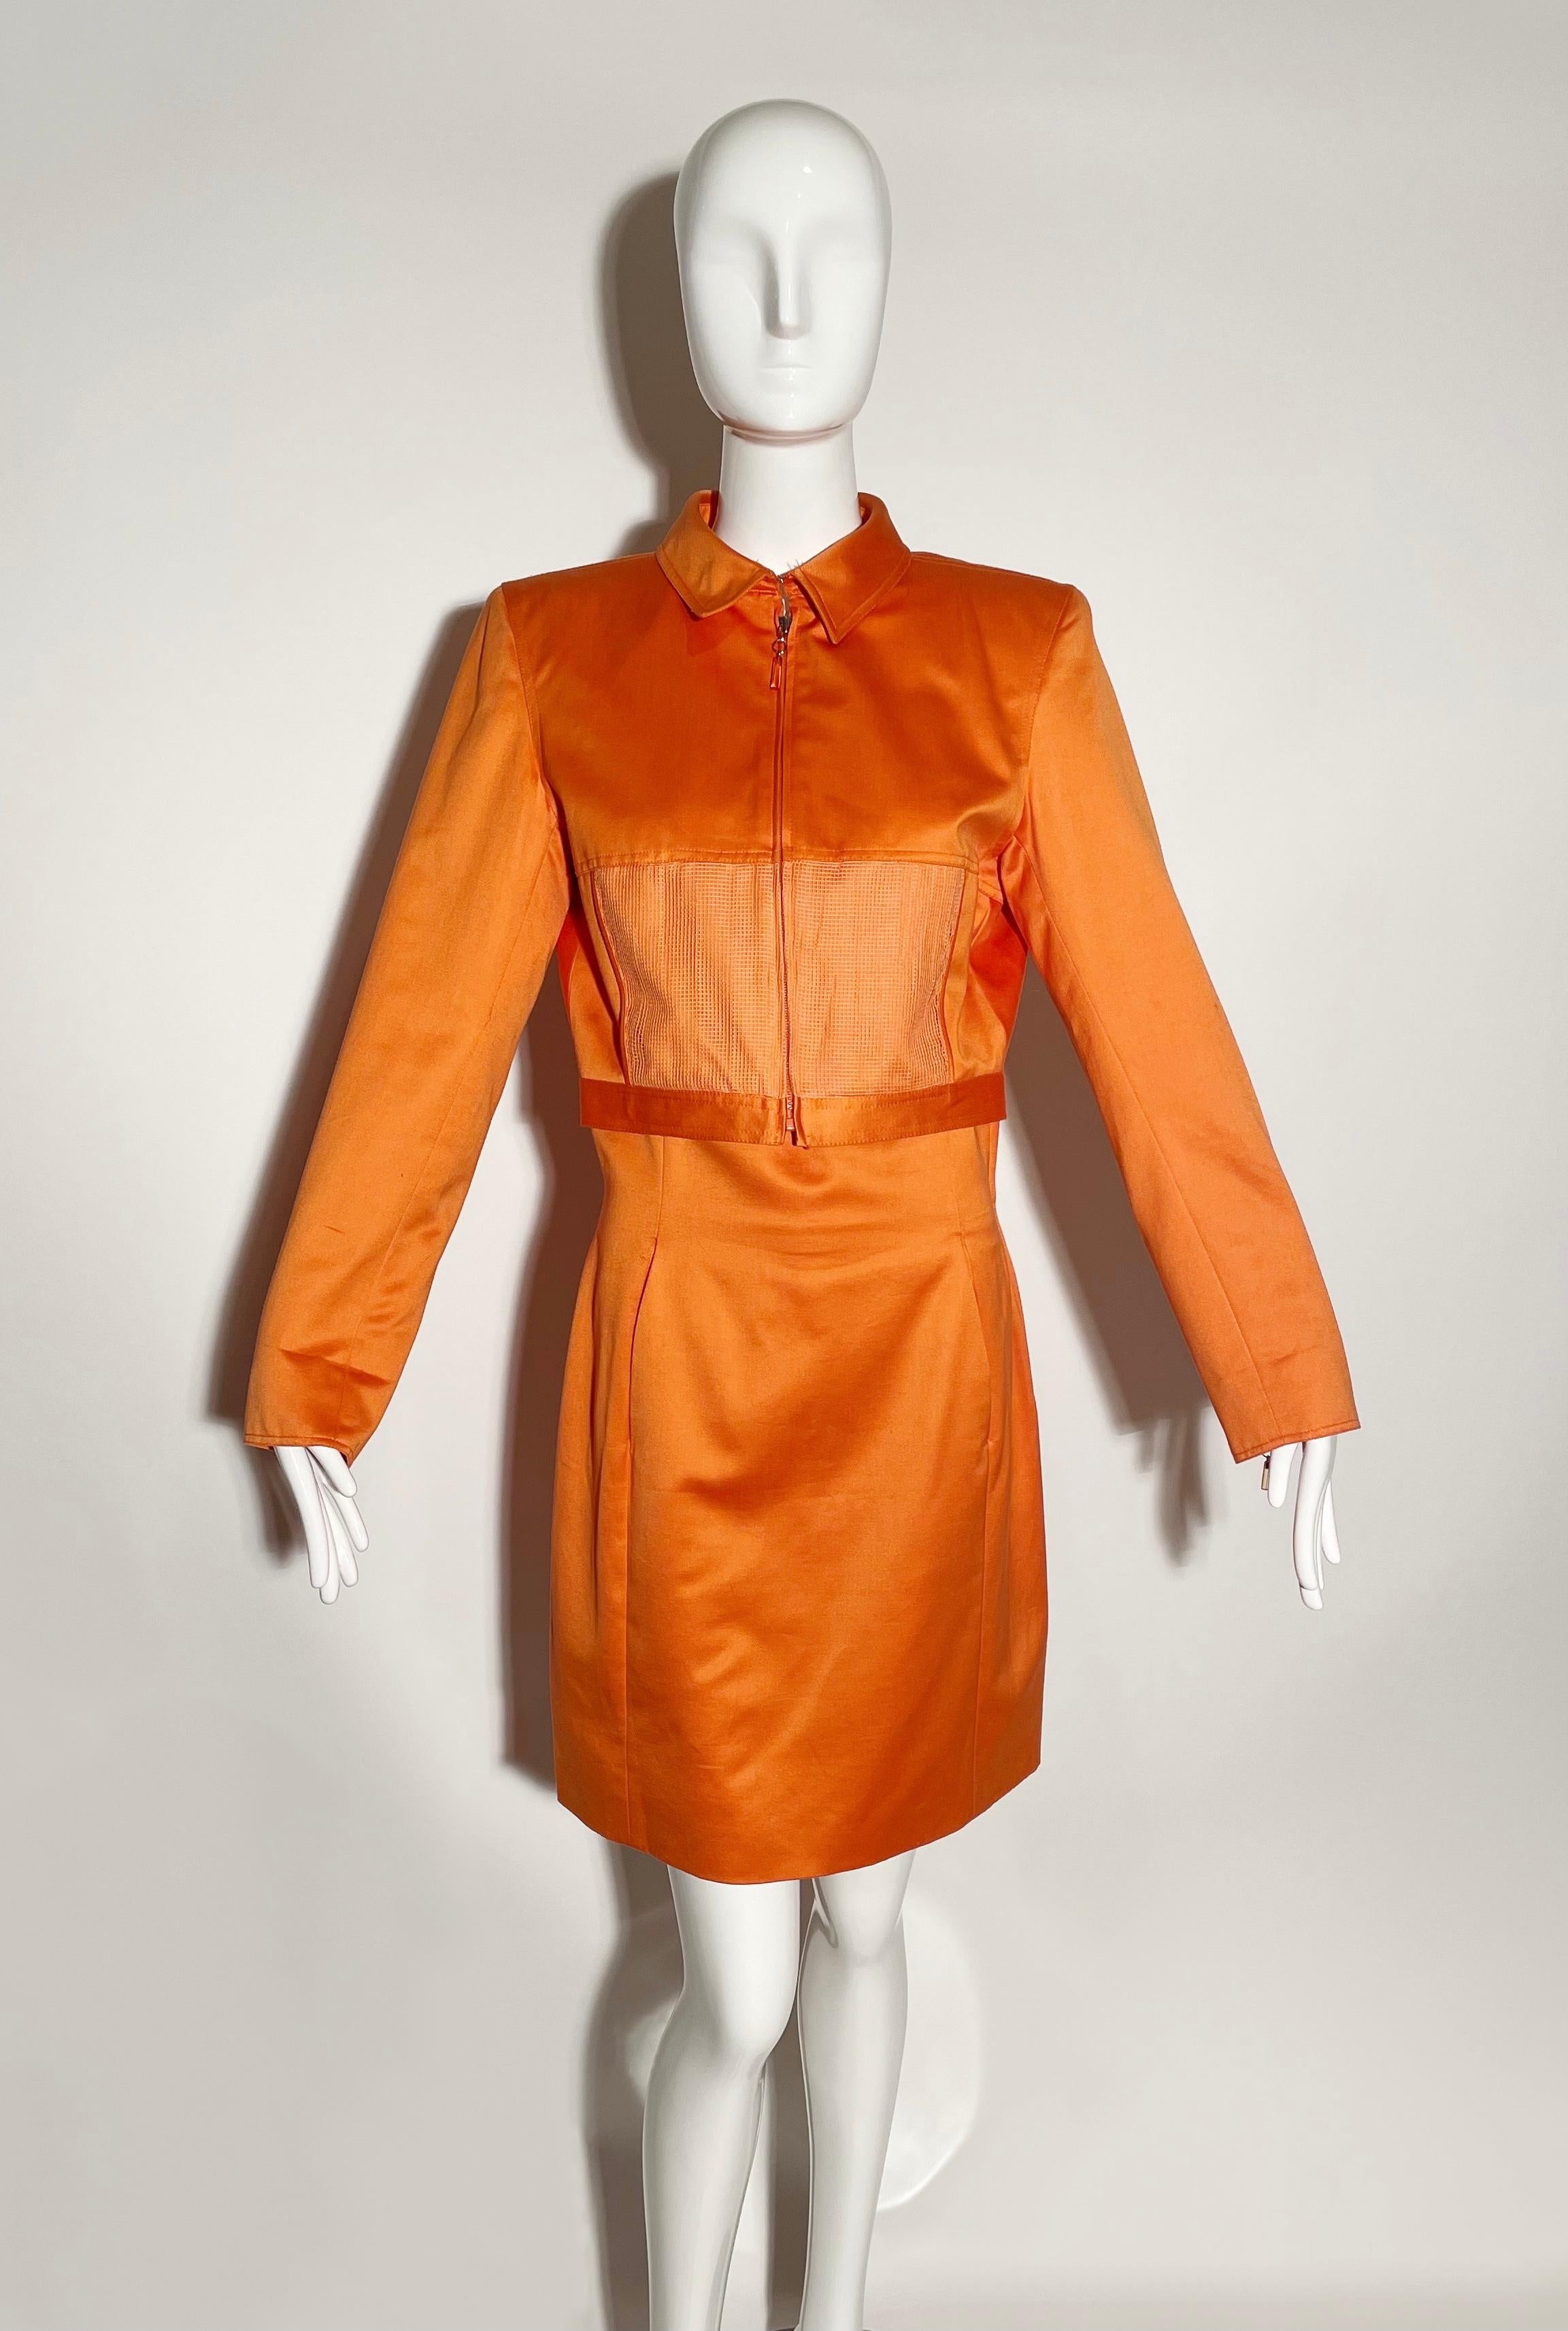 Orange skirt suit. Cropped, collared blazer with mesh front pockets. Shoulder pads. Zipper closure at front and wrists. High waisted skirt with front pockets. Lined. Cotton. Made in Italy. 

*Condition: Excellent vintage condition. No visible flaws.